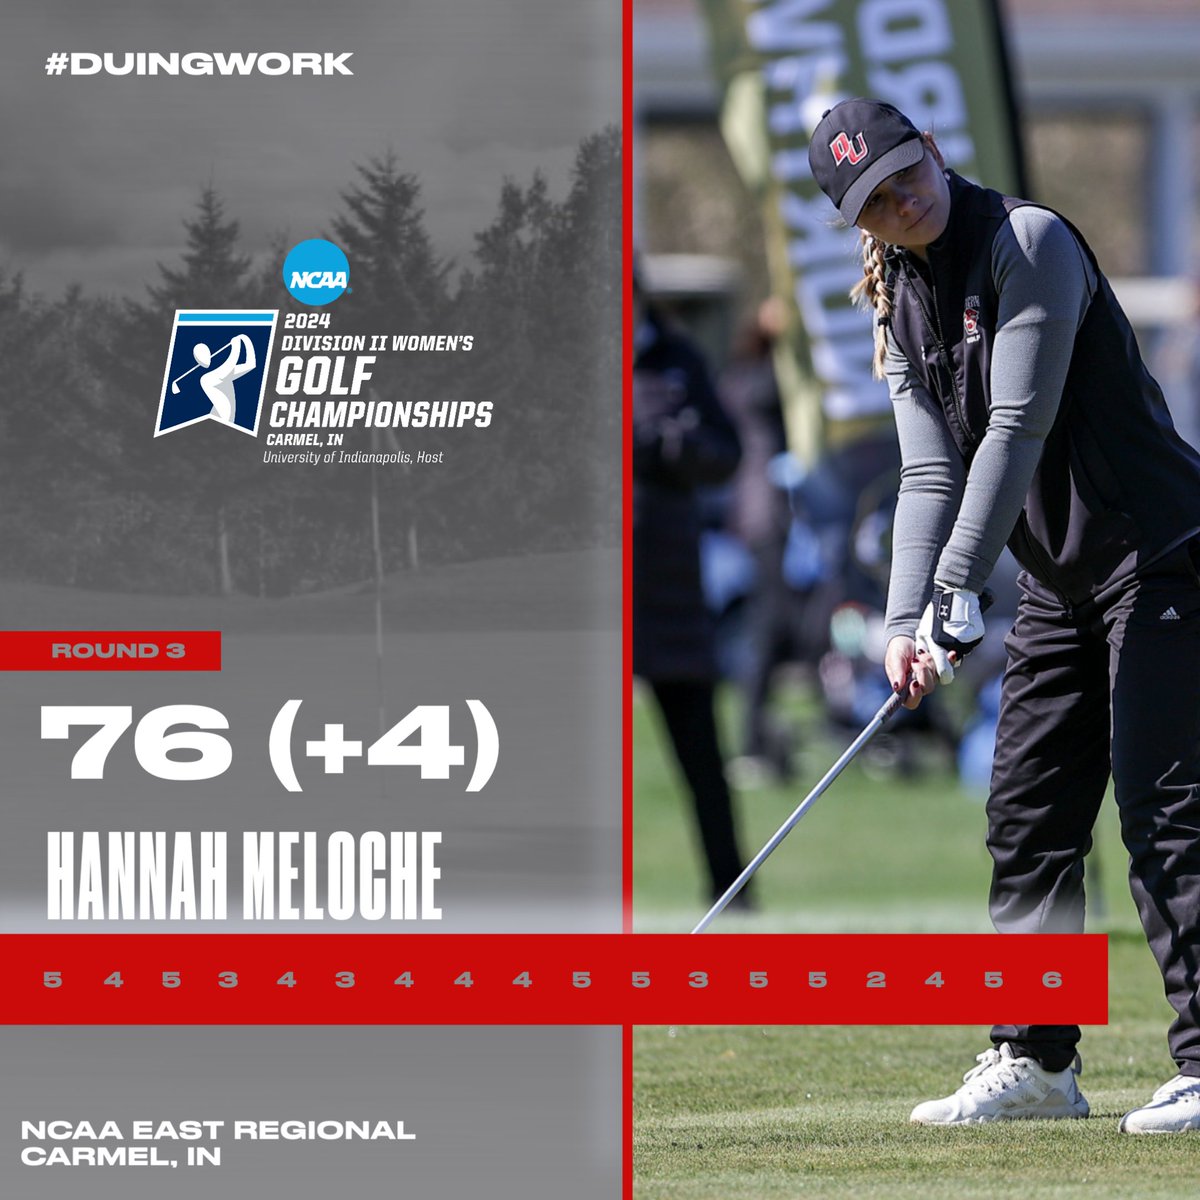 They did it! The women's golf team will be heading to Orlando, FL for the NCAA DII National Championships May 21-25 after finishing 5th at the East Regional. Hannah Meloche was the top finisher for DU in a tie for 8th and shot 76 today. #DUingWork #DUGolf #DUPanthers